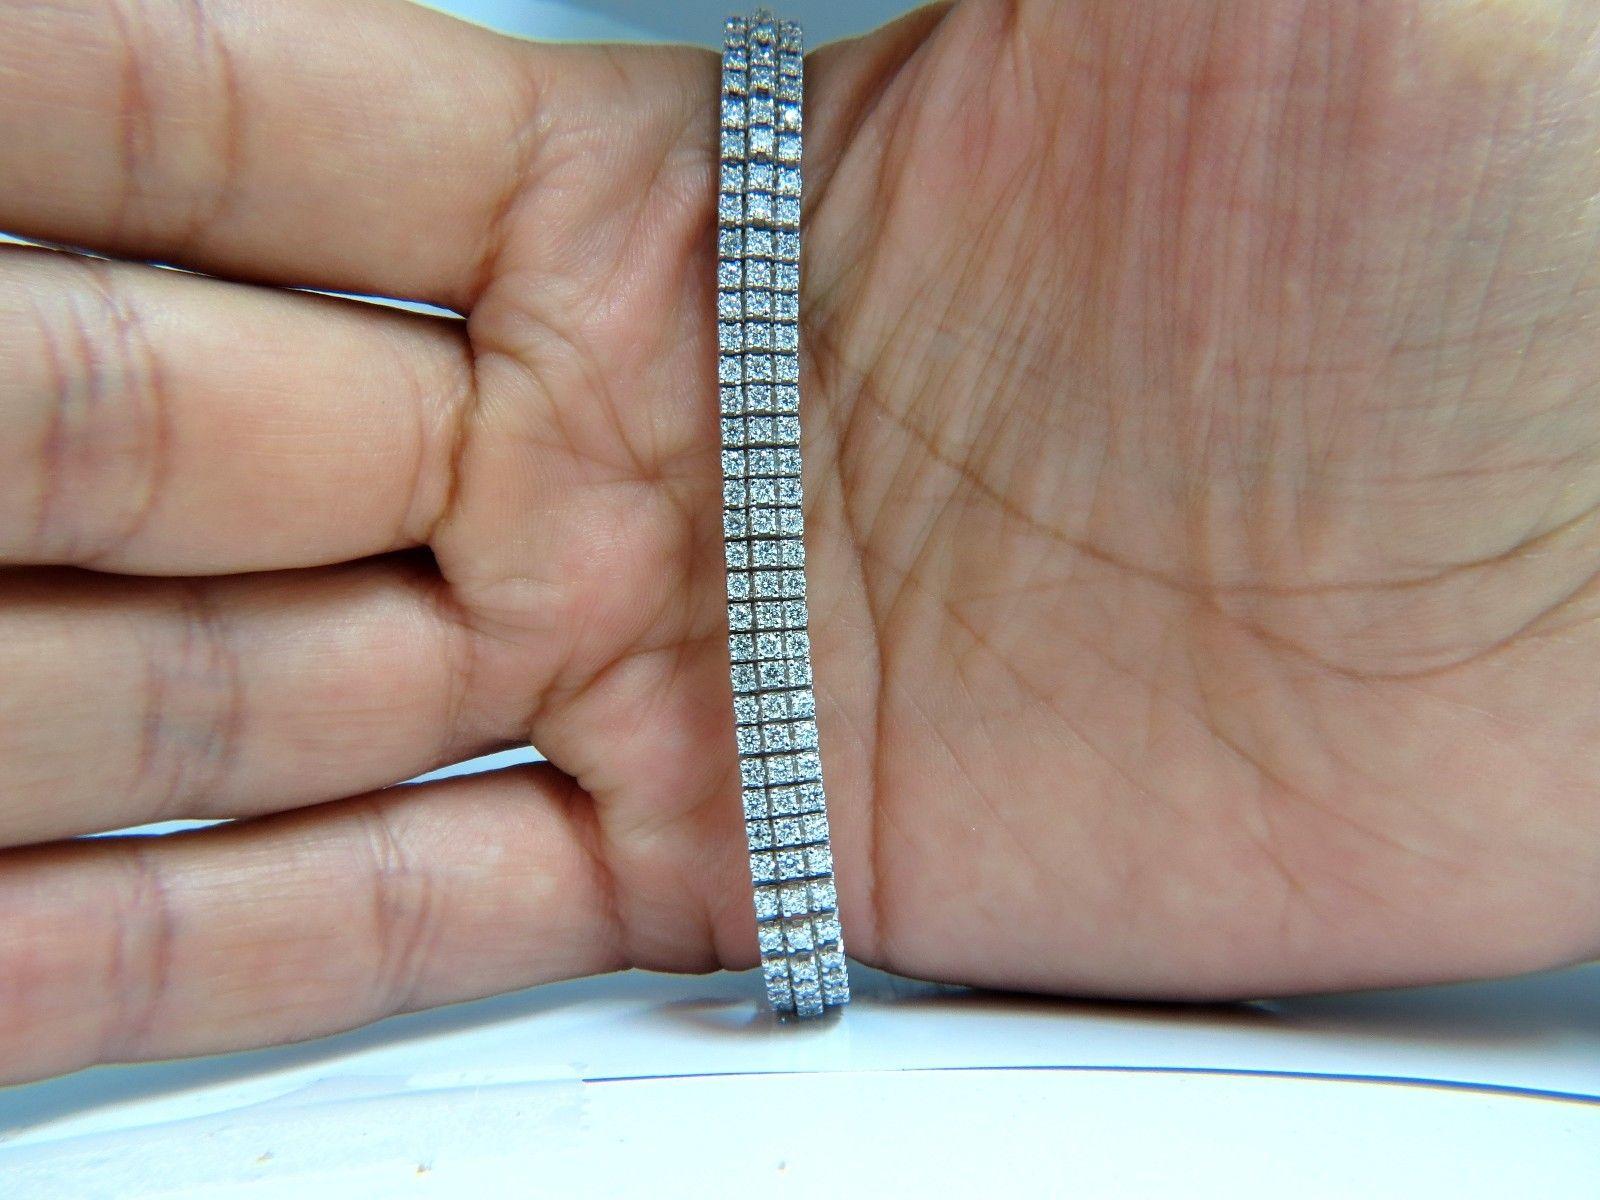 5.50ct. Natural diamonds Three row bracelet.

Rounds, full cut.

G color Vs-2 clarity.

14kt. white gold 

20.1 Grams.

.26 inch wide

7 inch long (wearable length)

secure clasp.

$11,000 Appraisal to accompany.